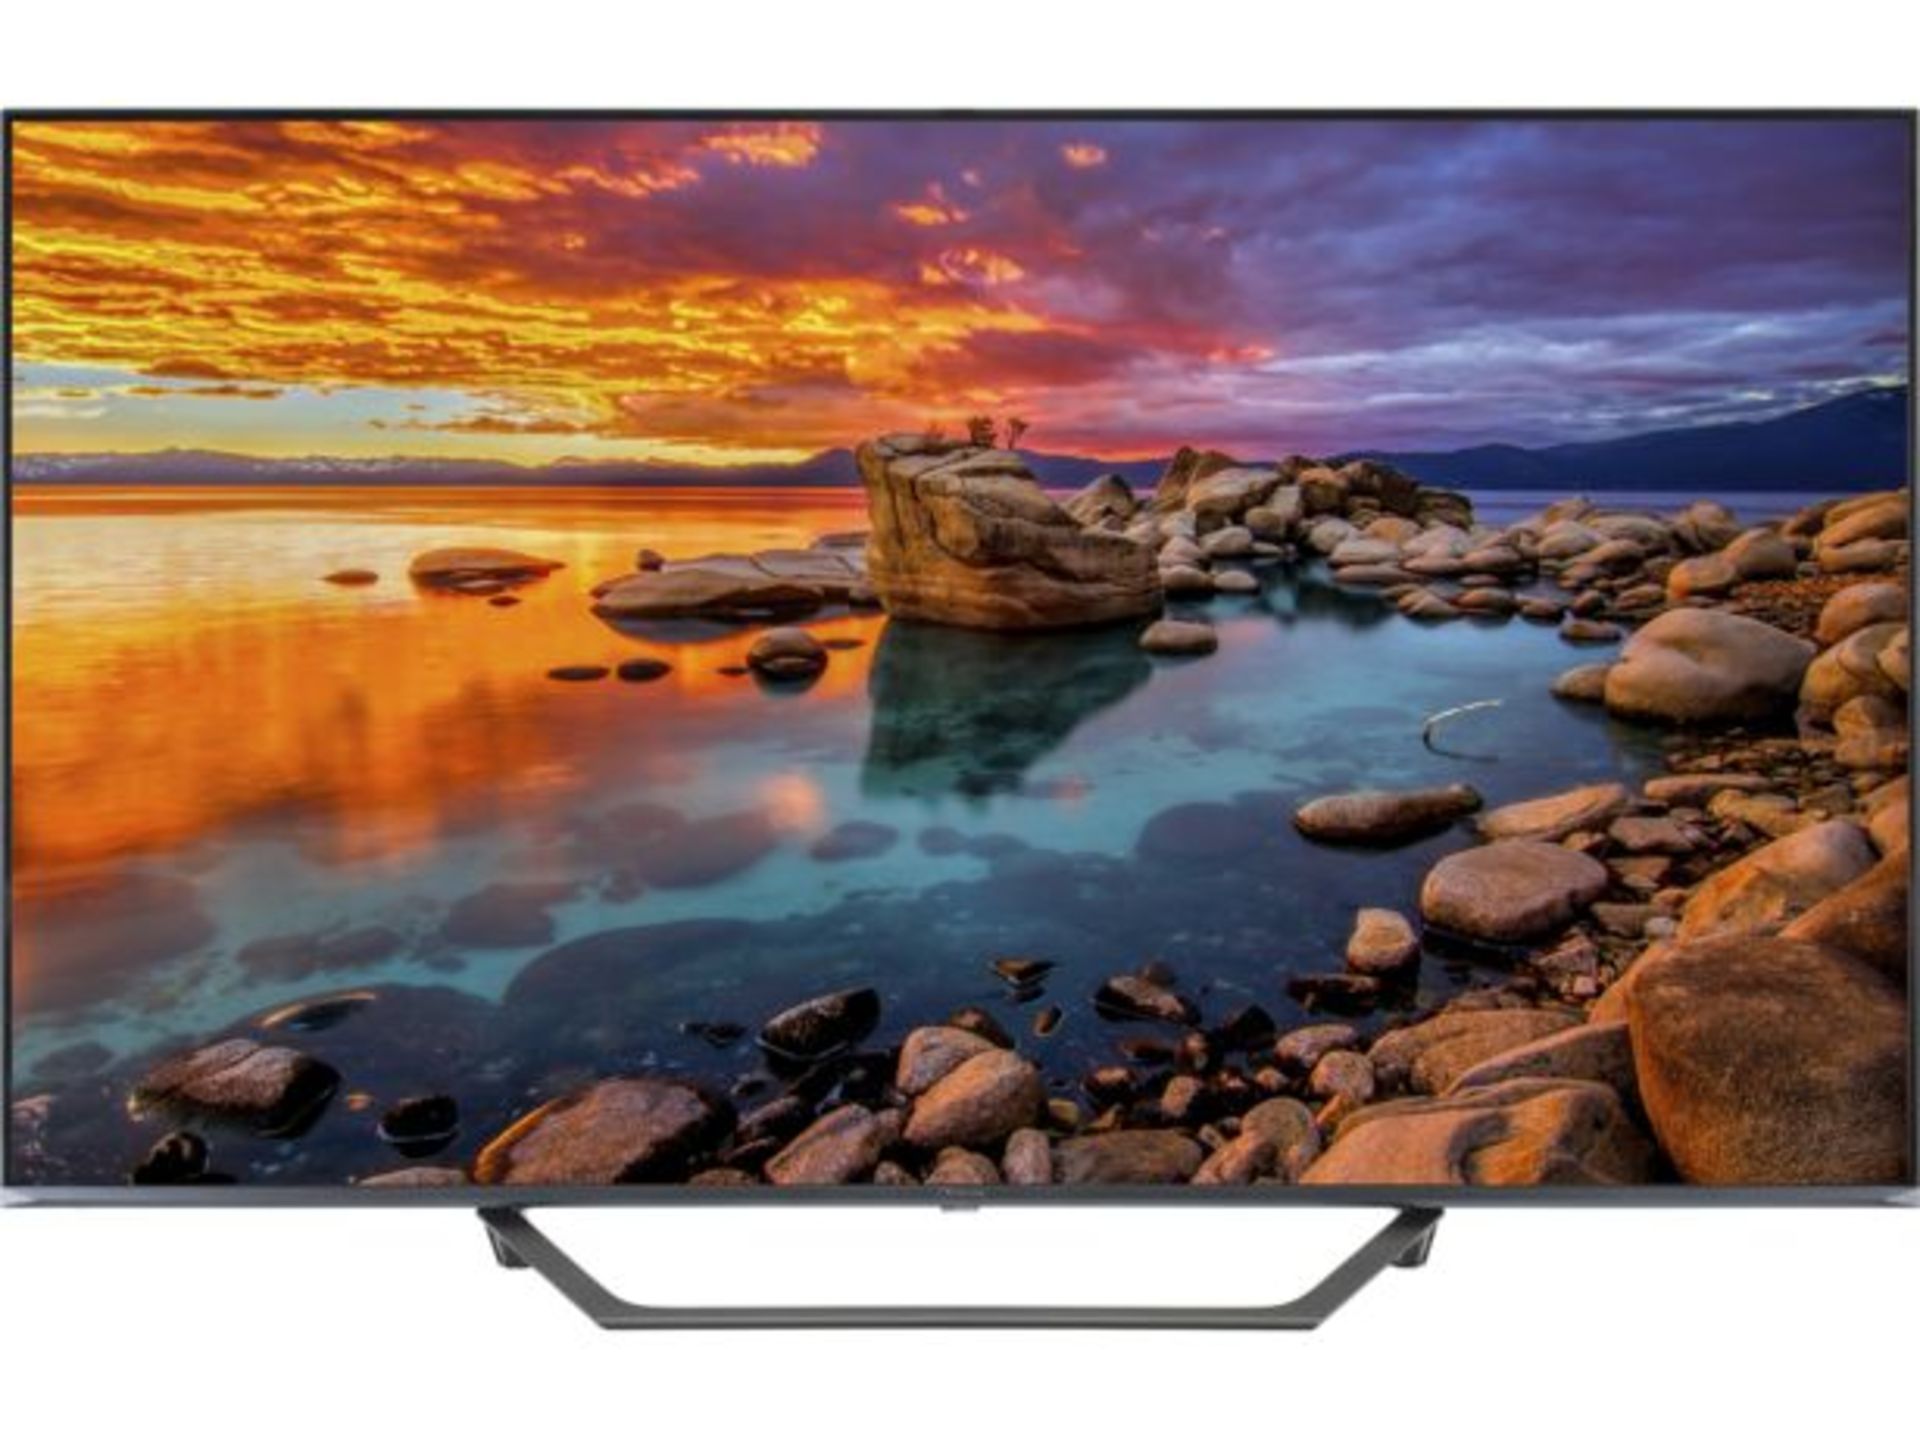 1 BOXED HISENSE 65AE7400FTUK (2020) LED HDR 4K ULTRA HD SMART TV, 65 INCH WITH FREEVIEW PLAY